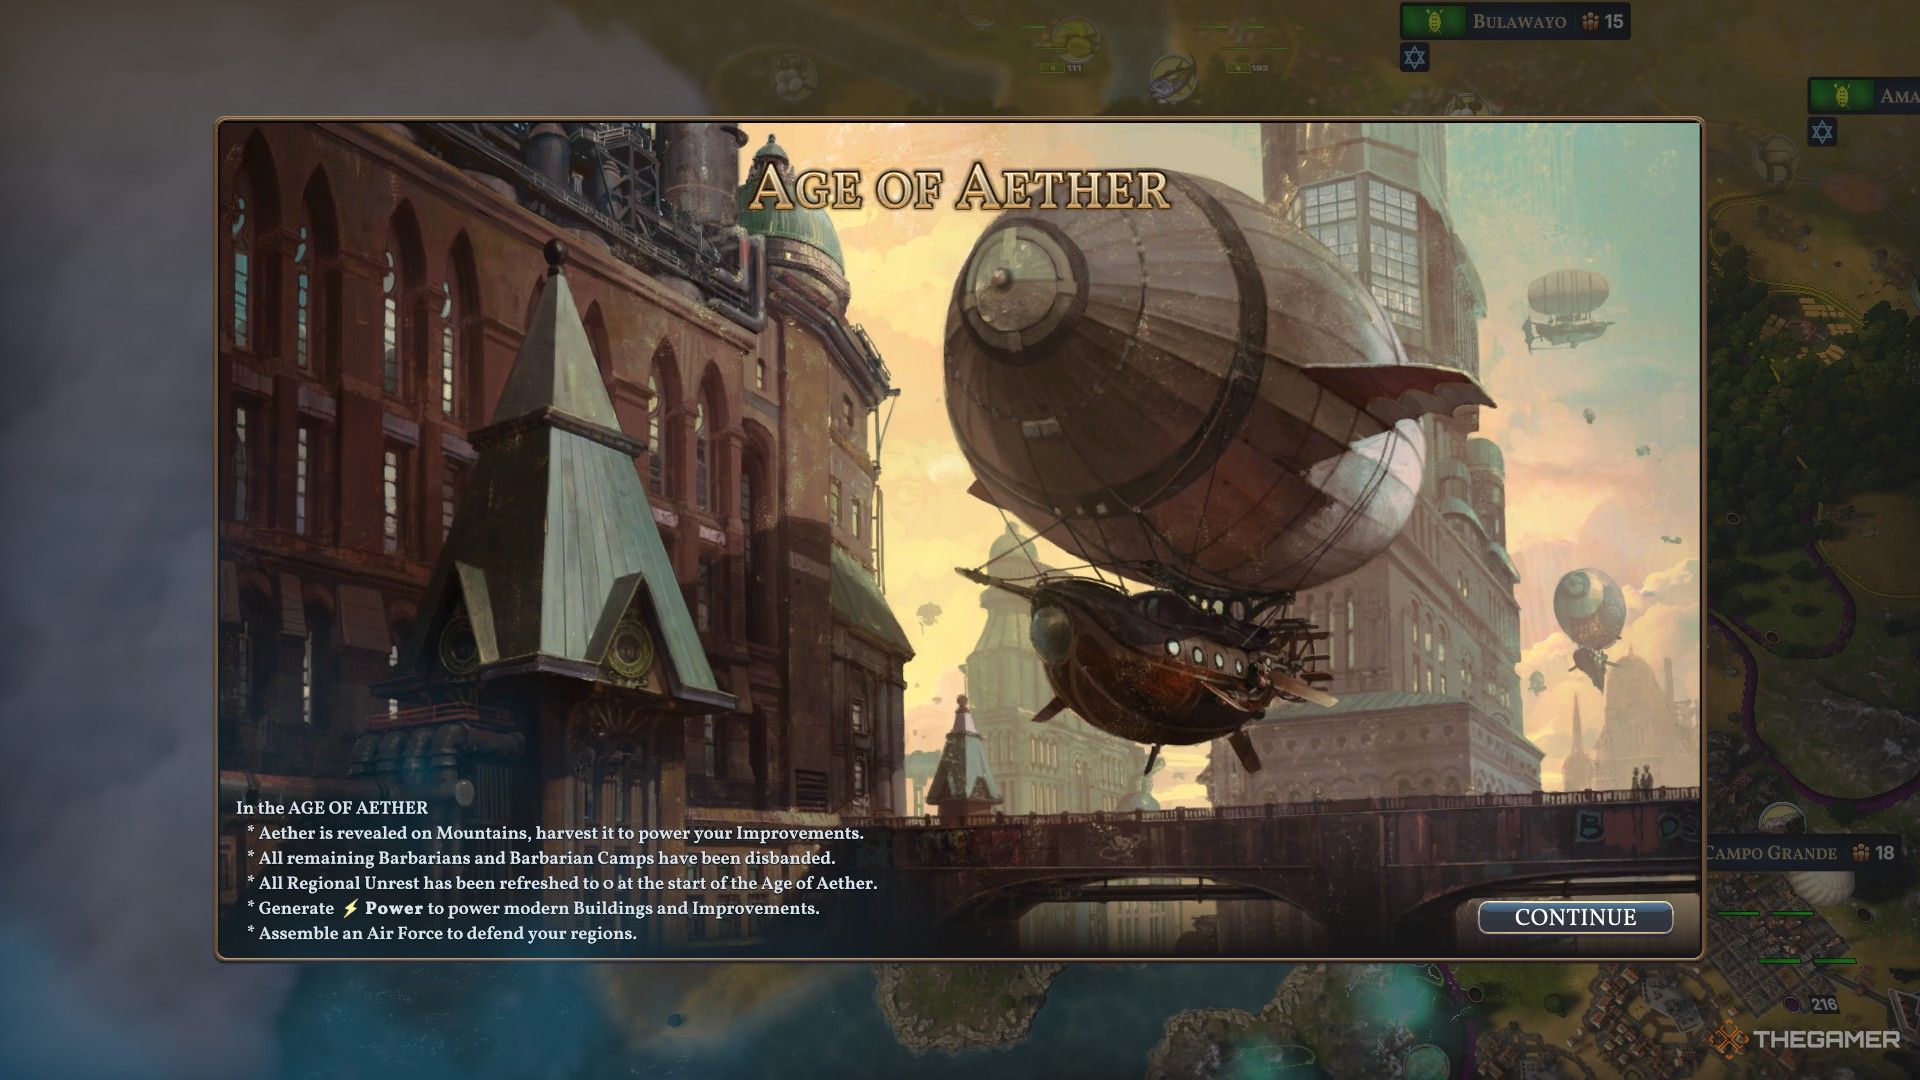 The intro screen for the Age of Aether, with a large zeppelin, in Millennia